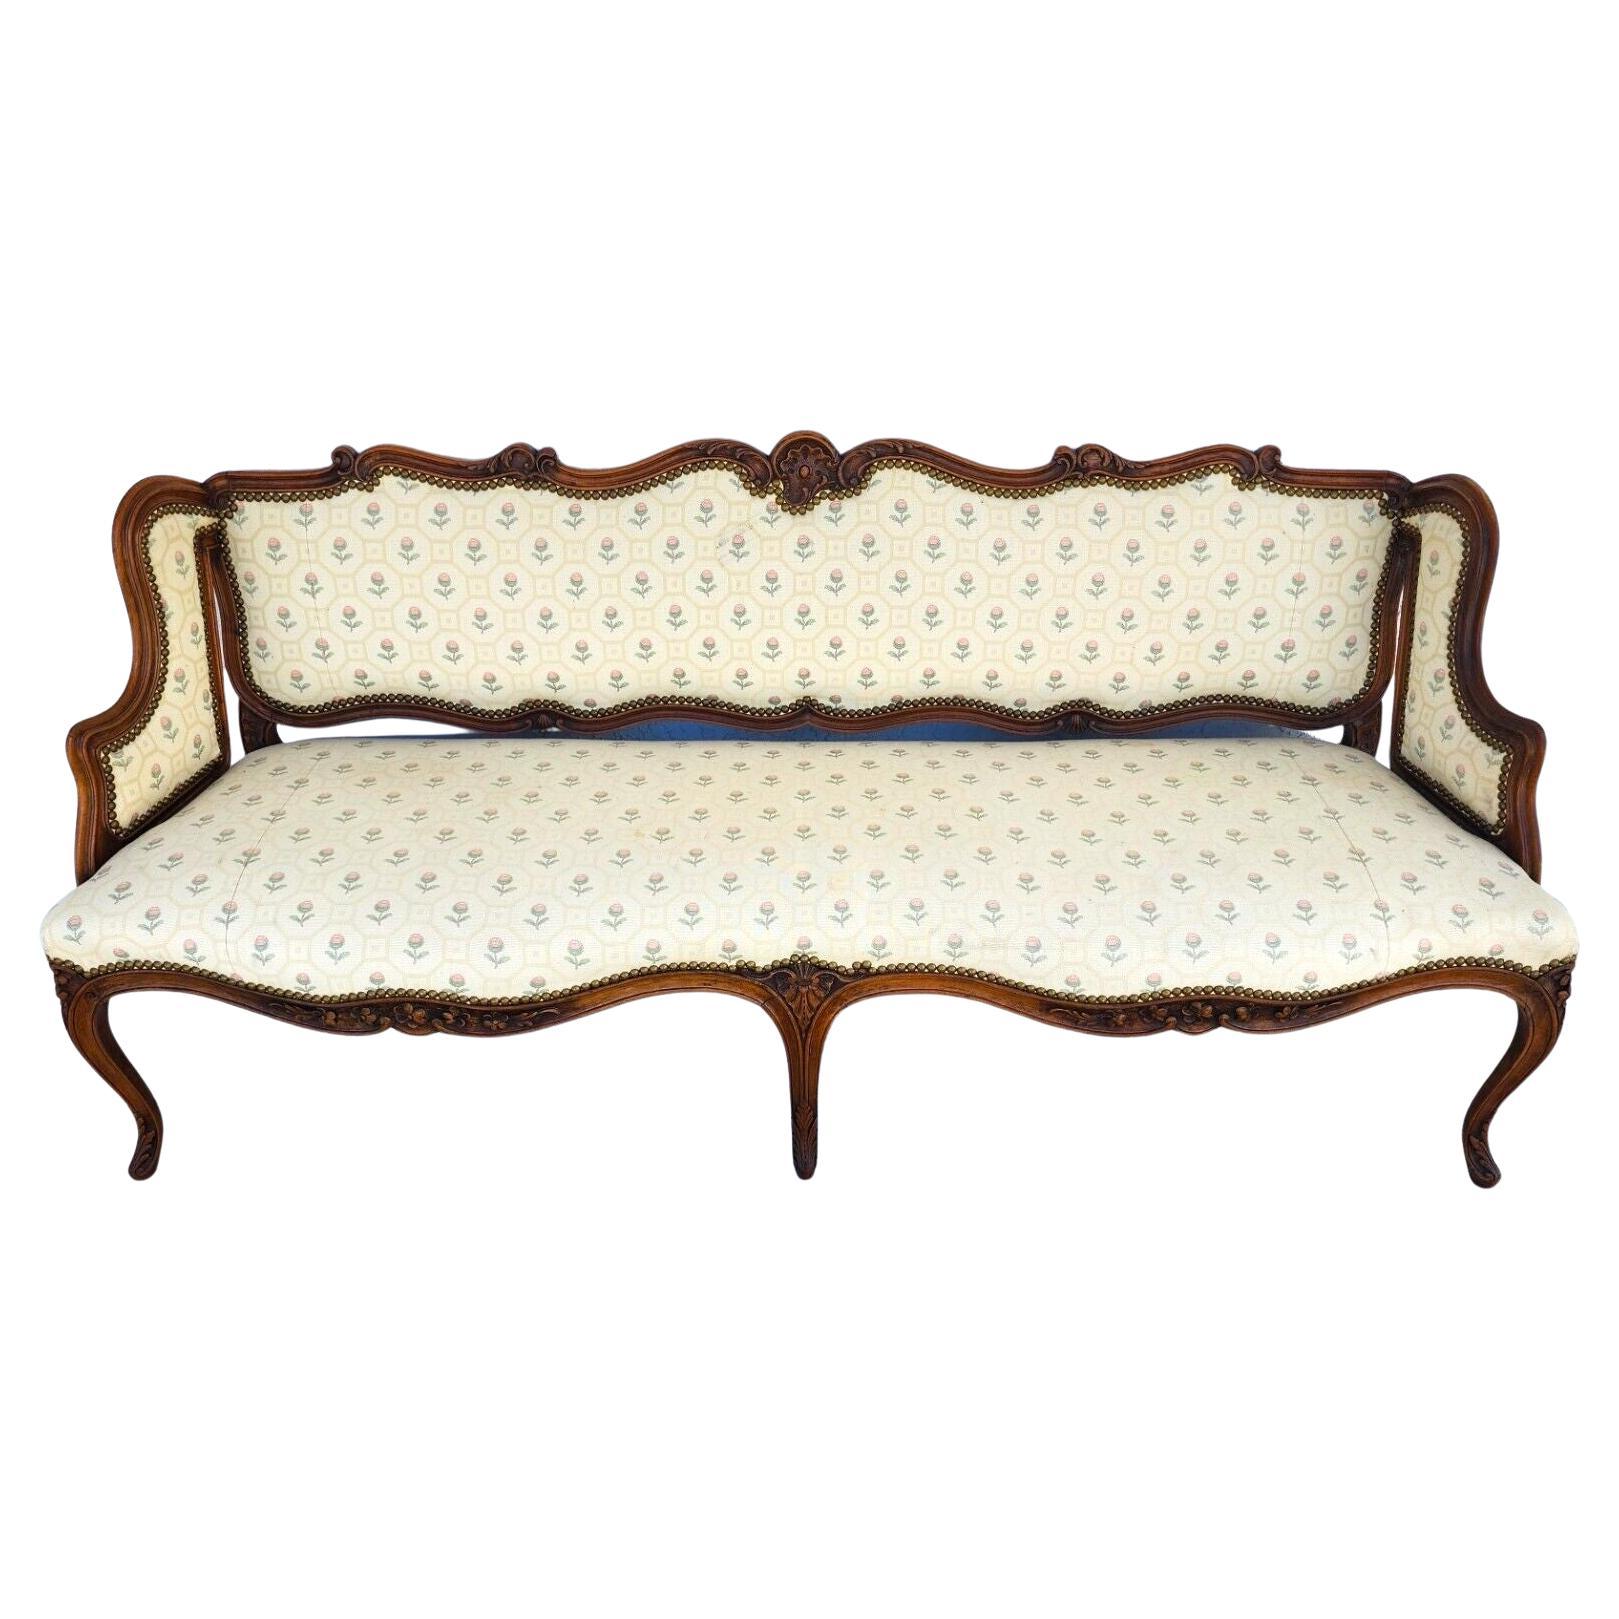 Antique Canape Bench Louis XV Style 1800s